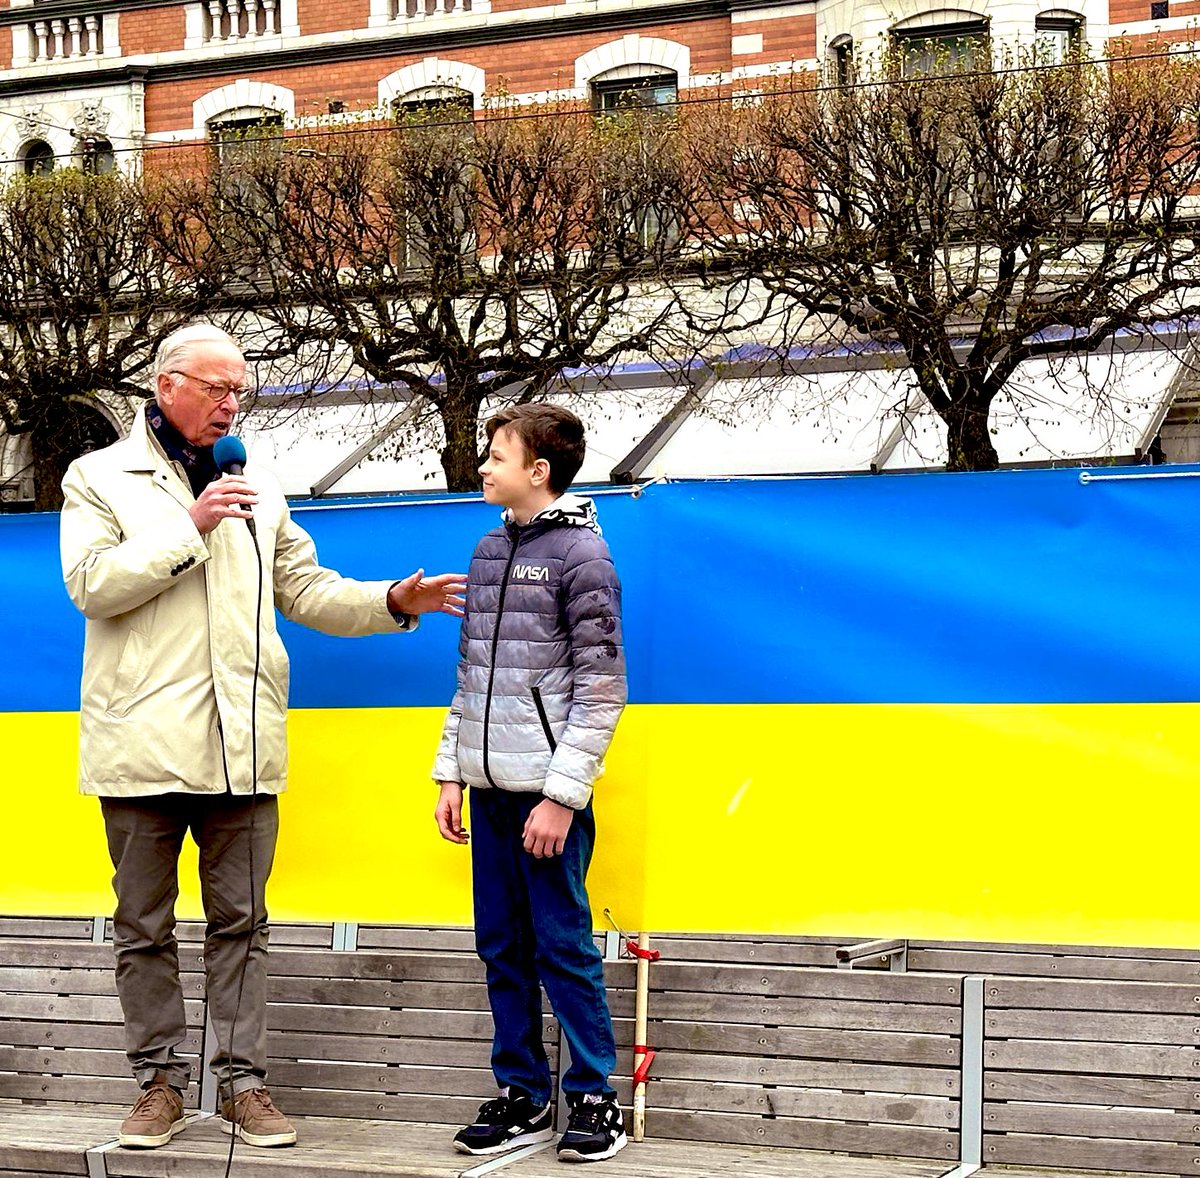 Stockholm today: only by winning war against RuZZian imperialistic war machine, #Ukraine could restore its territorial integrity, rebuild country & ensure security for entire Europe. This could be reached by 🇺🇦 🤝 with steadfast support of democratic world! #StandWithUkraine